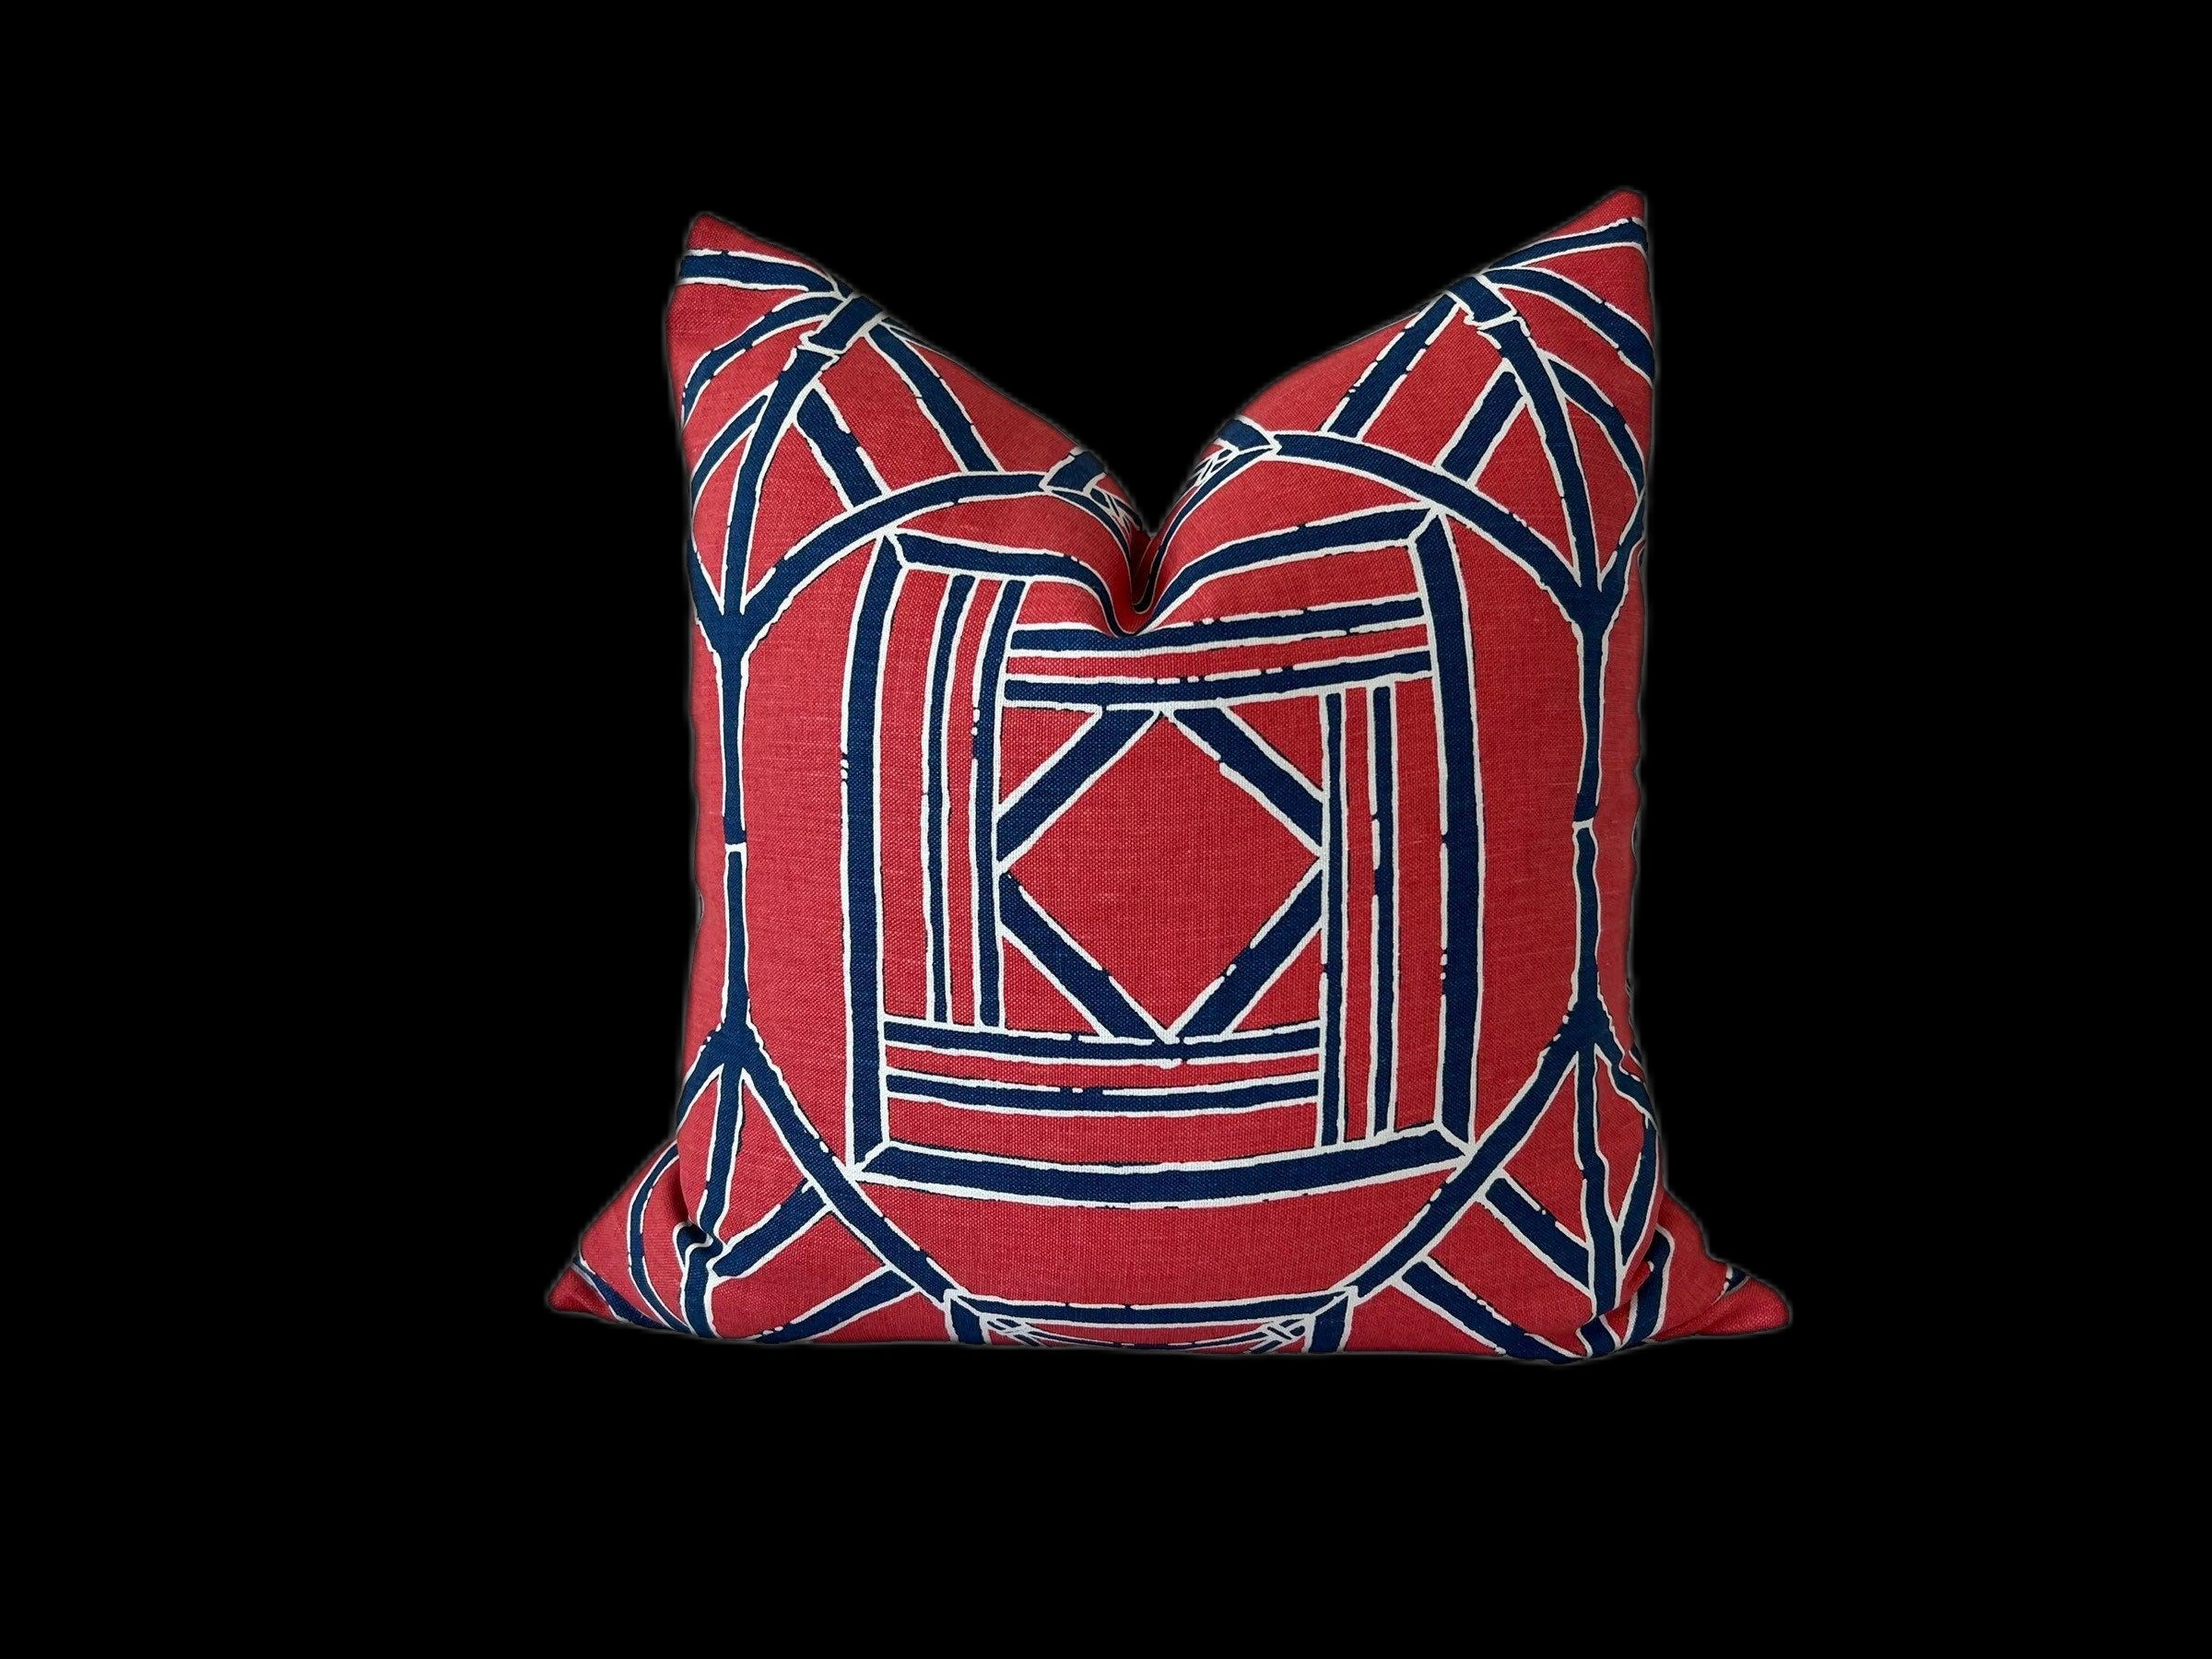 Shoji Panel Pillow in Raspberry and Blue. Geometric Accent Designers Pillow Cover in Red Bamboo Chinoiserie Lumbar Cushion Euro Sham